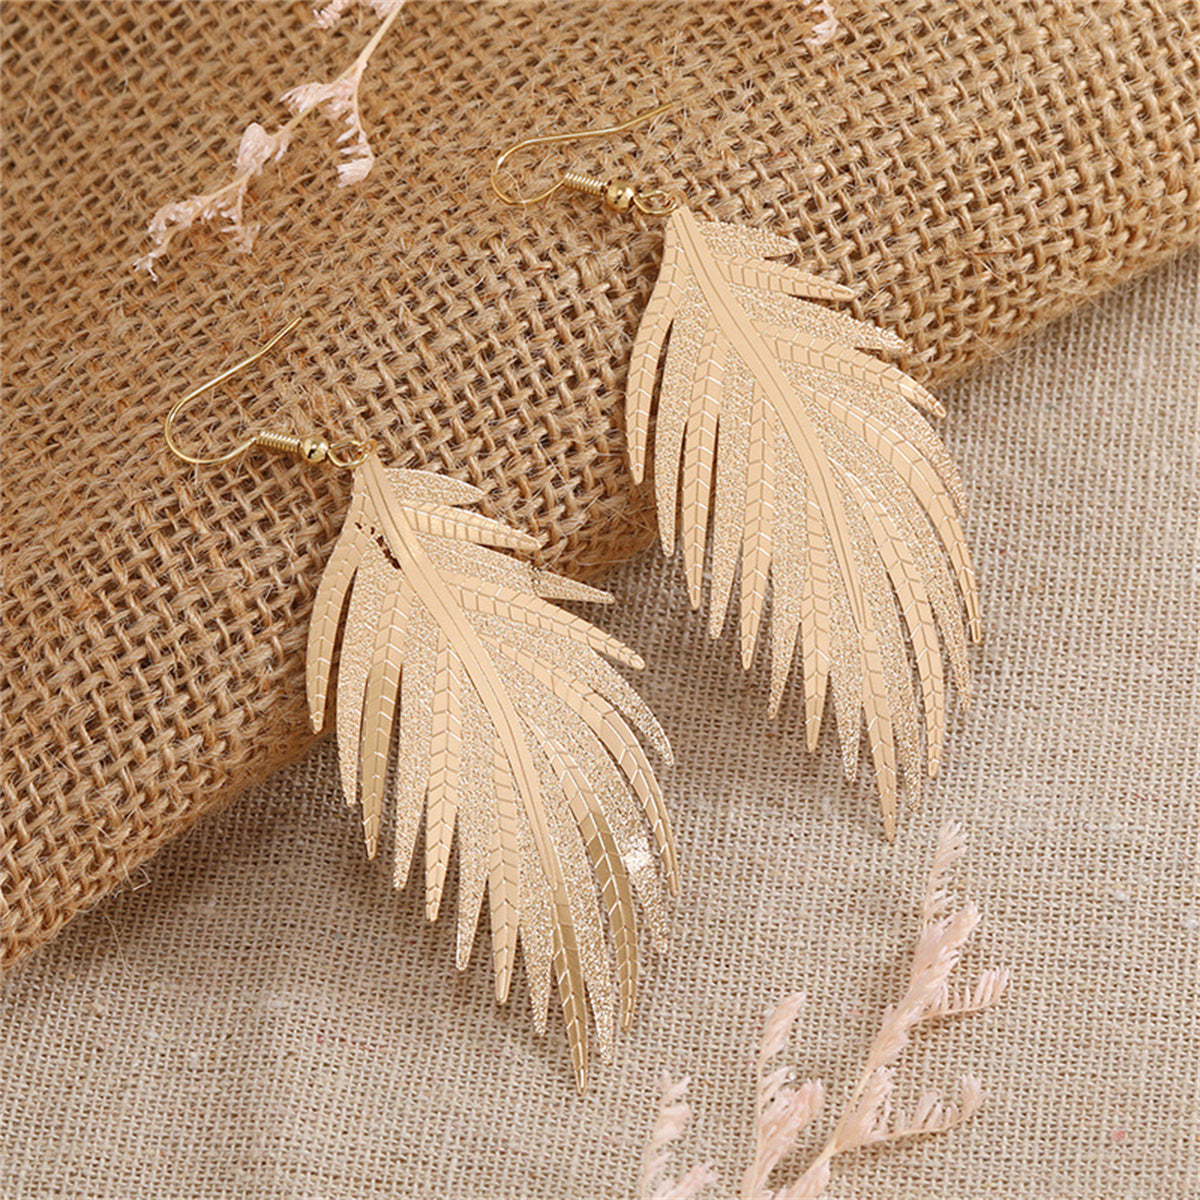 18K Gold-Plated Feather Drop Earrings